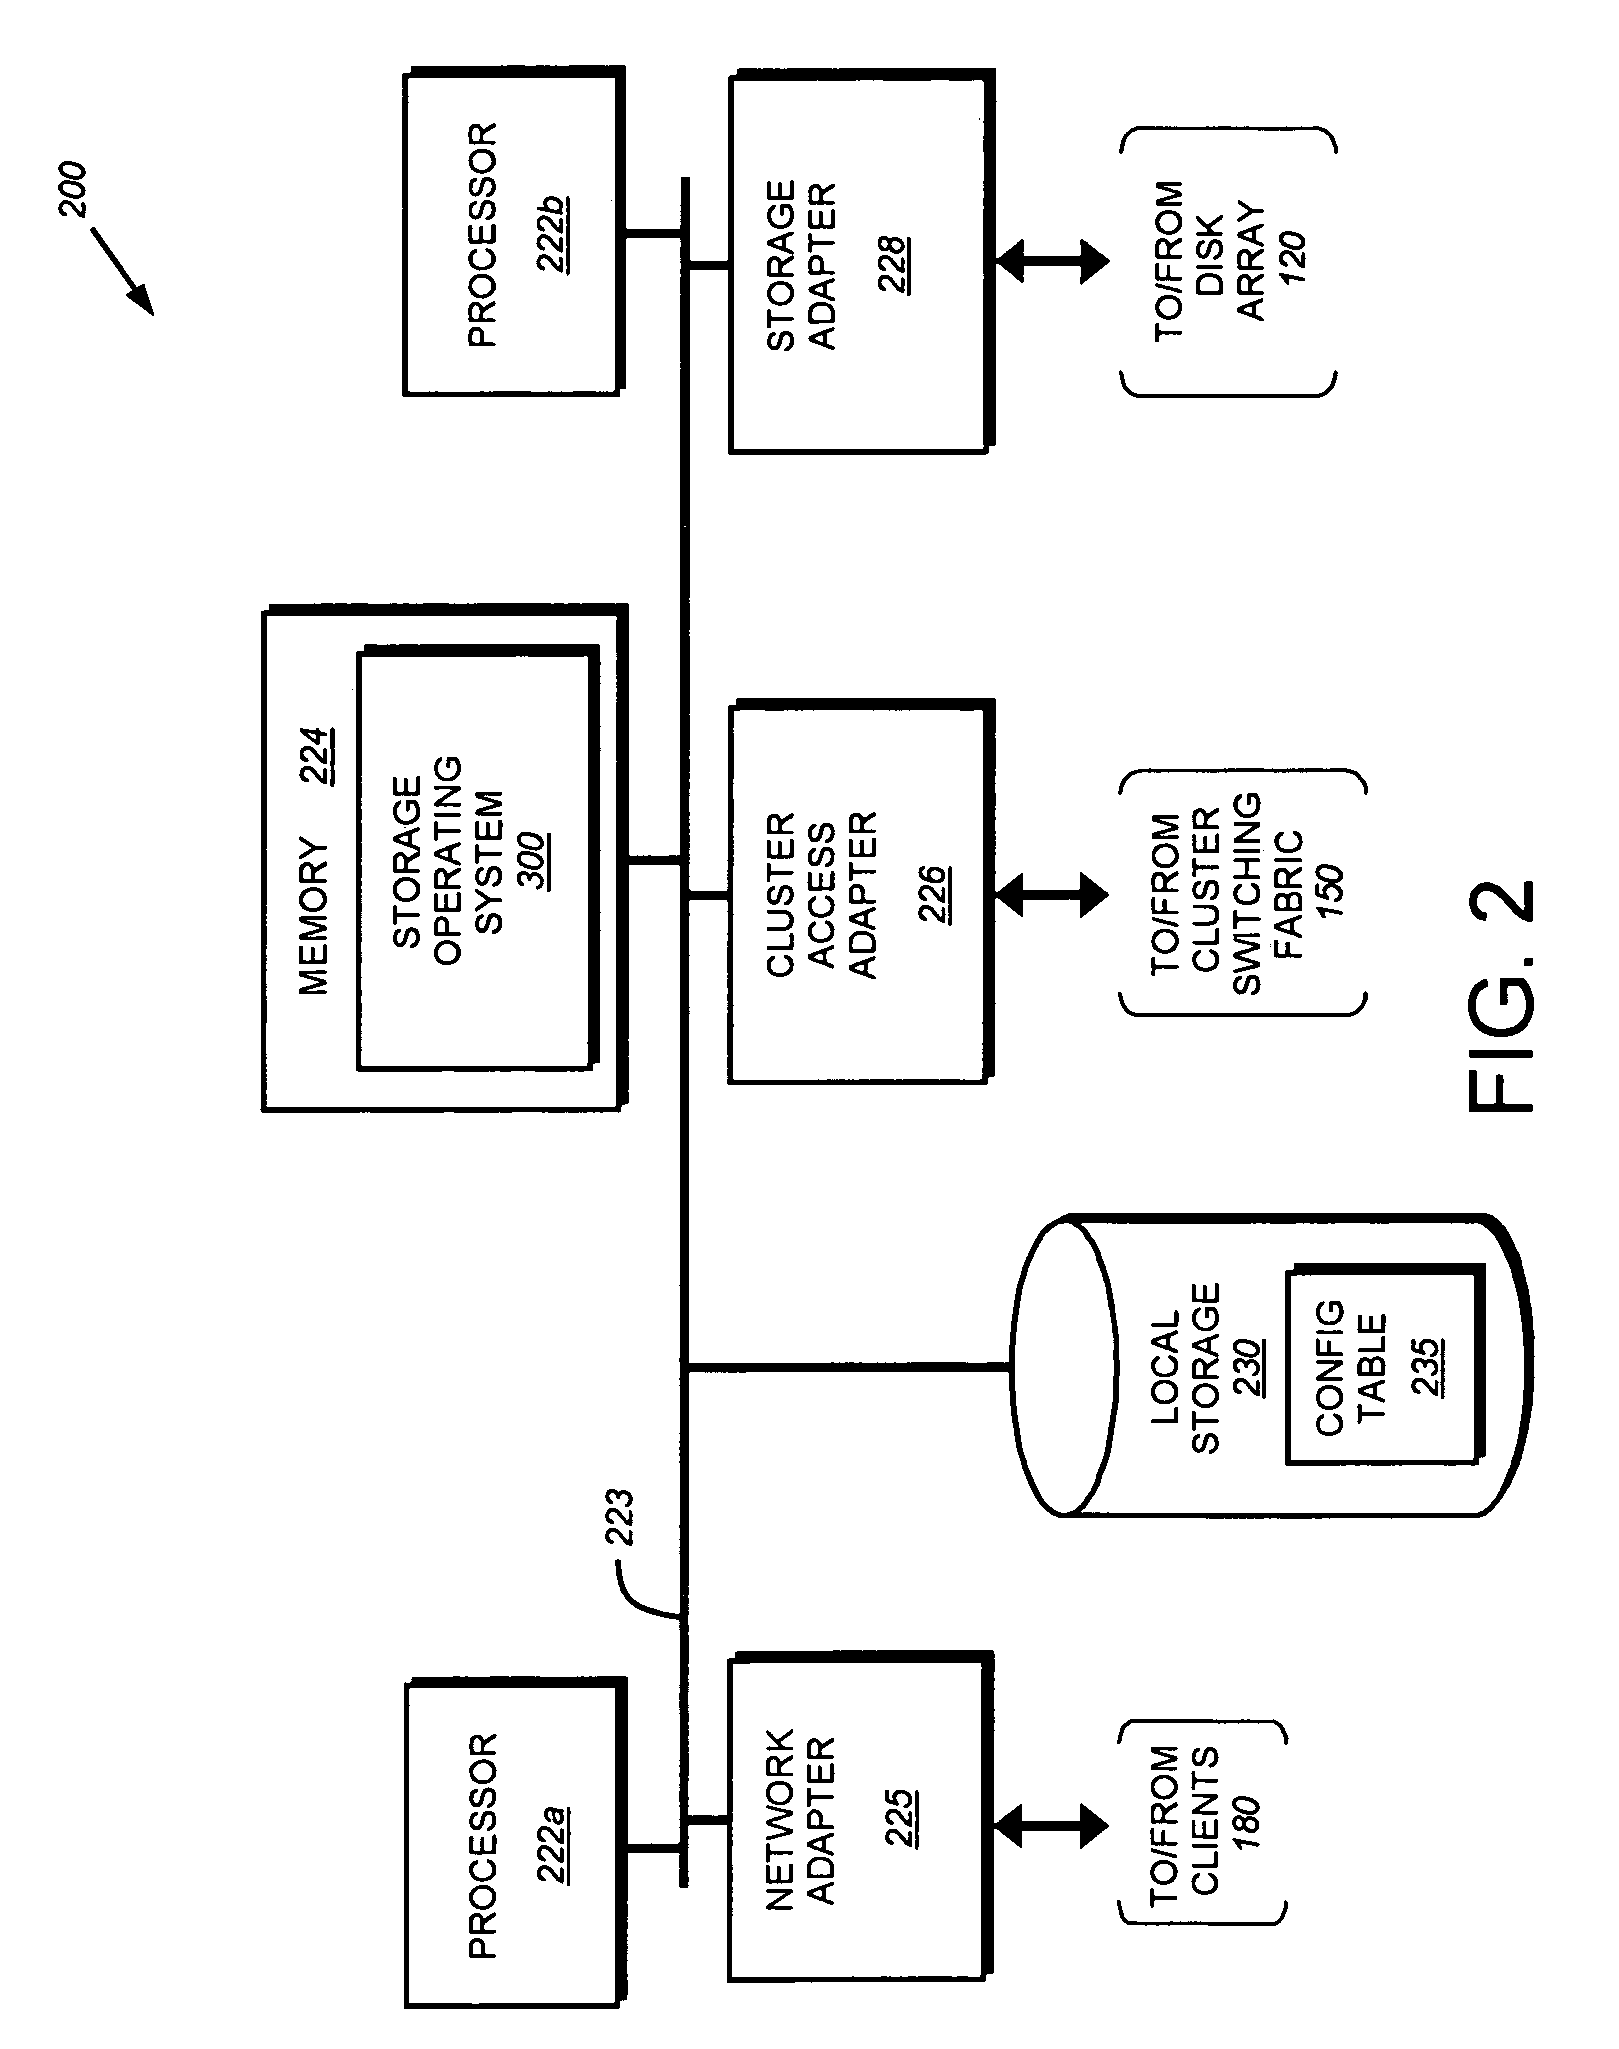 System and method for multiplexing channels over multiple connections in a storage system cluster